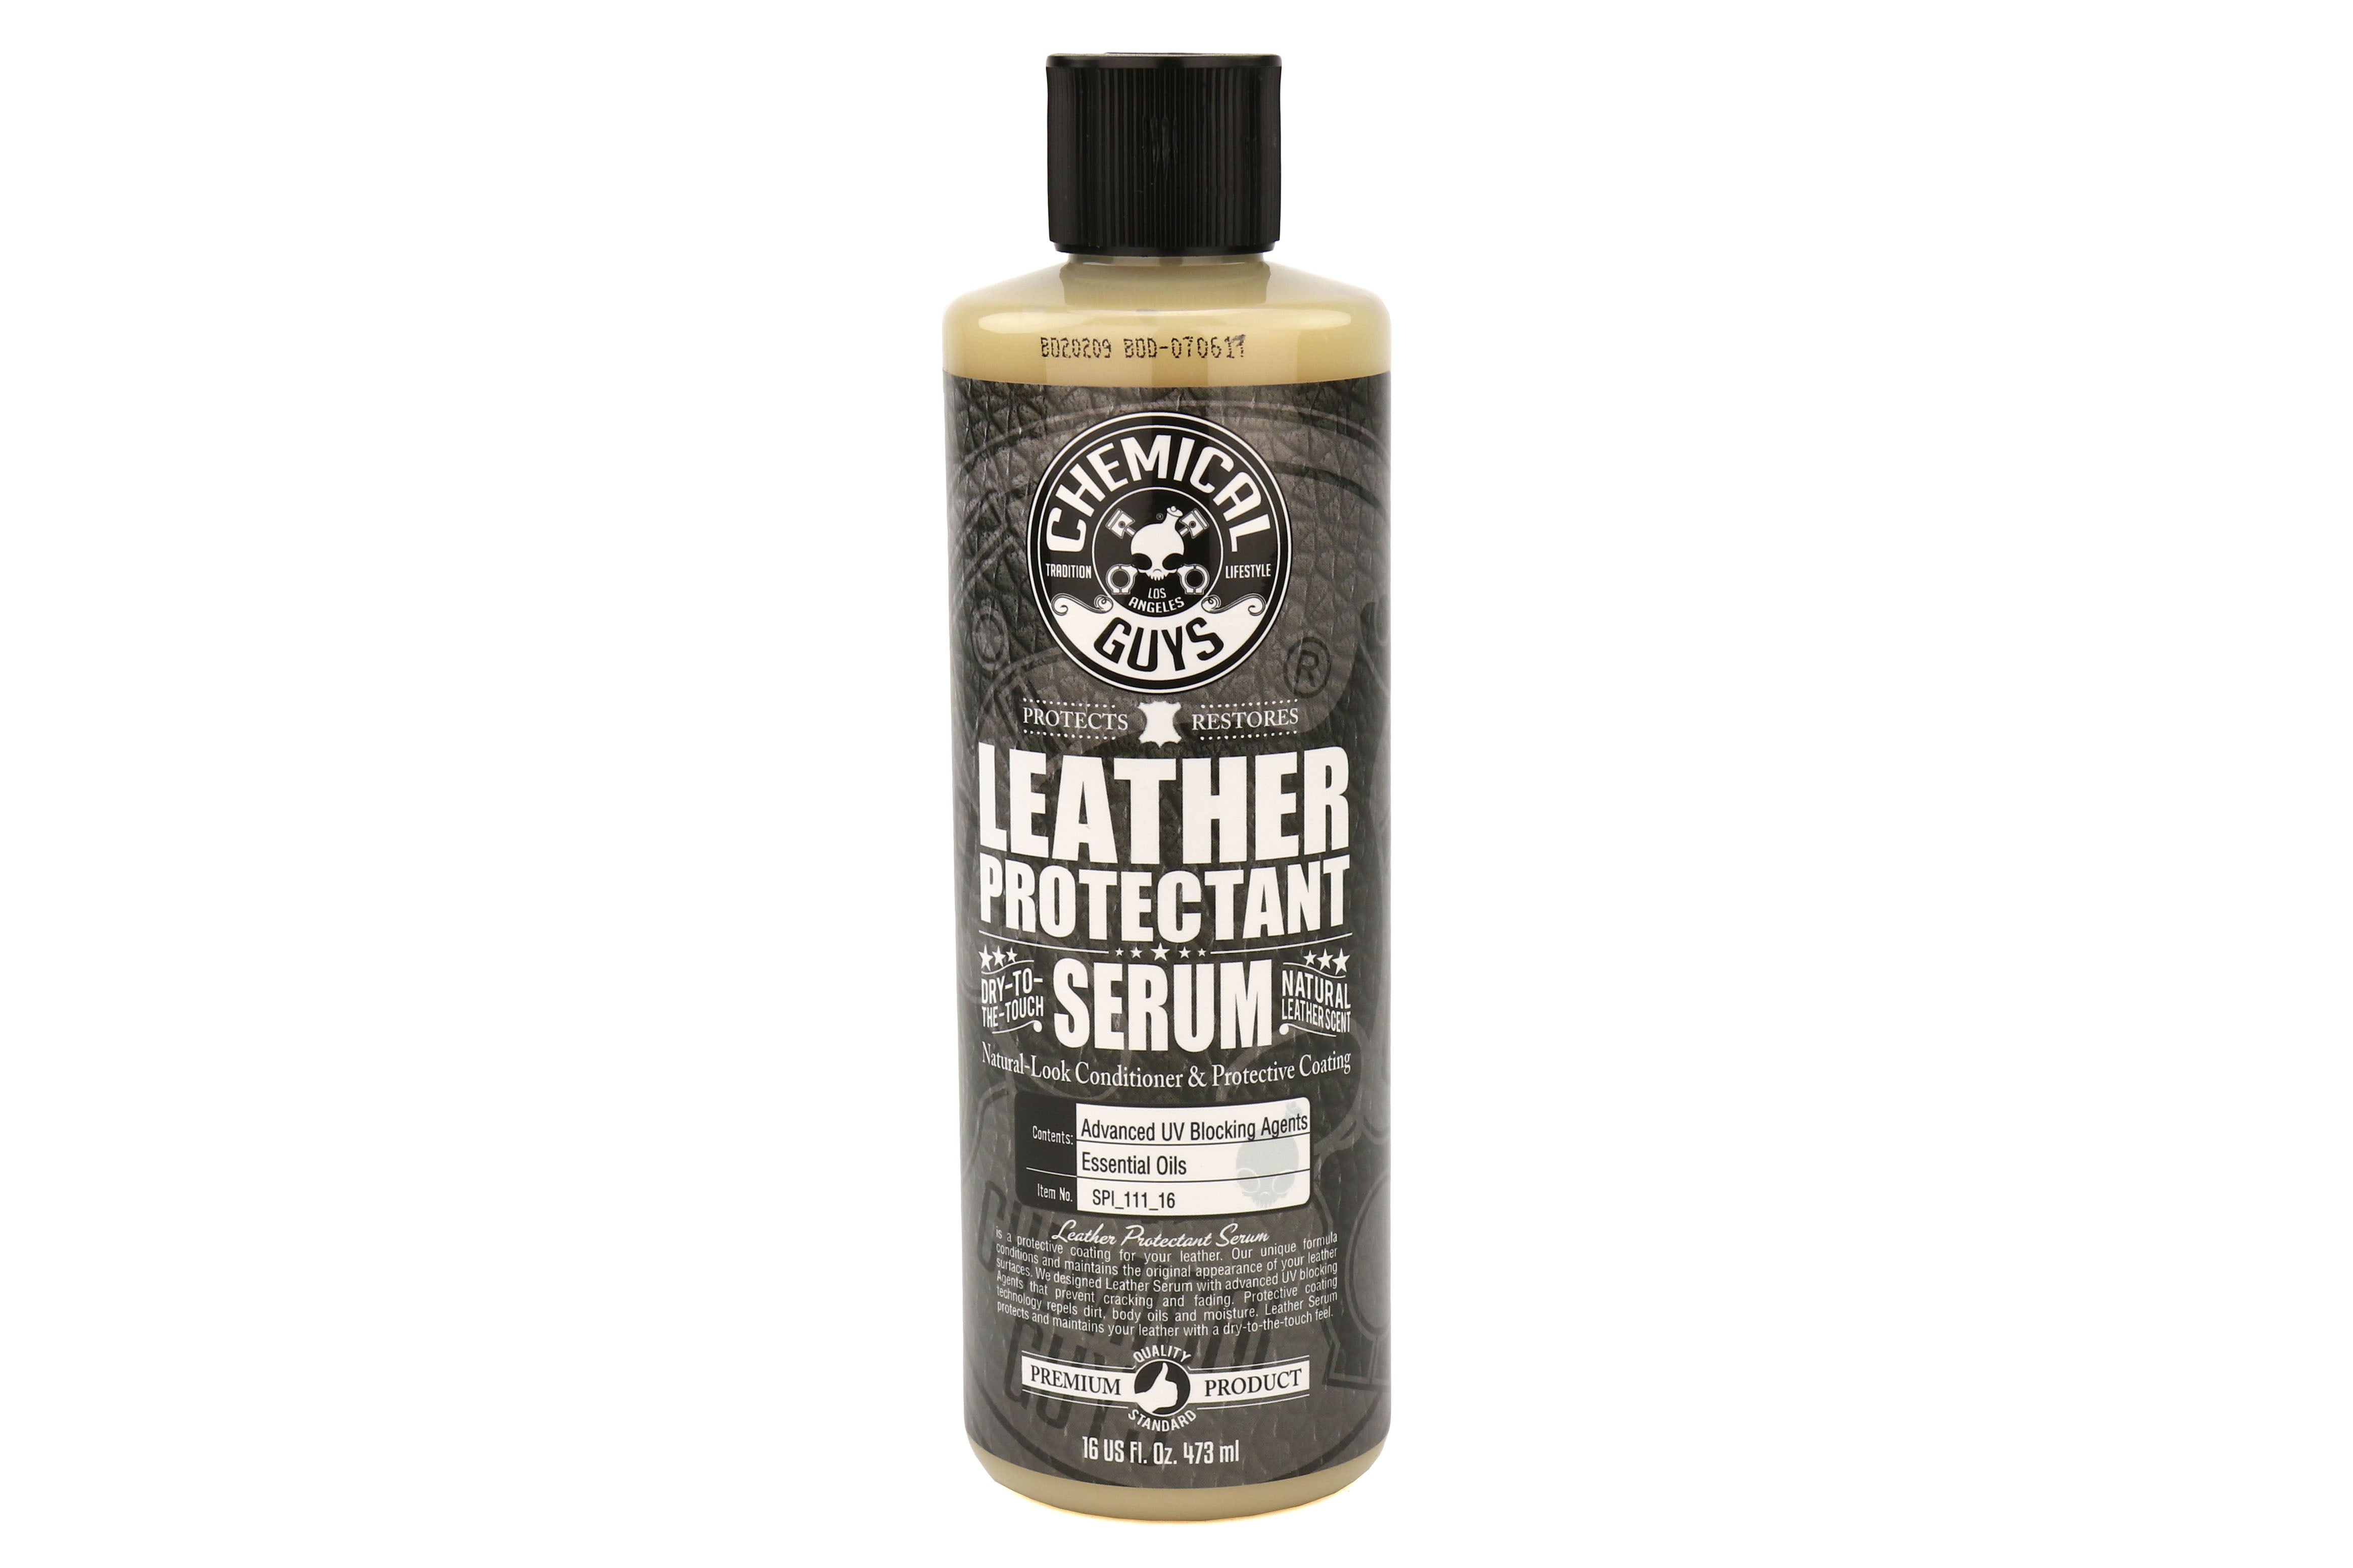 Chemical Guys NaturalLook Leather Conditioner and Protective Coating Serum  16oz, SPI_111_16